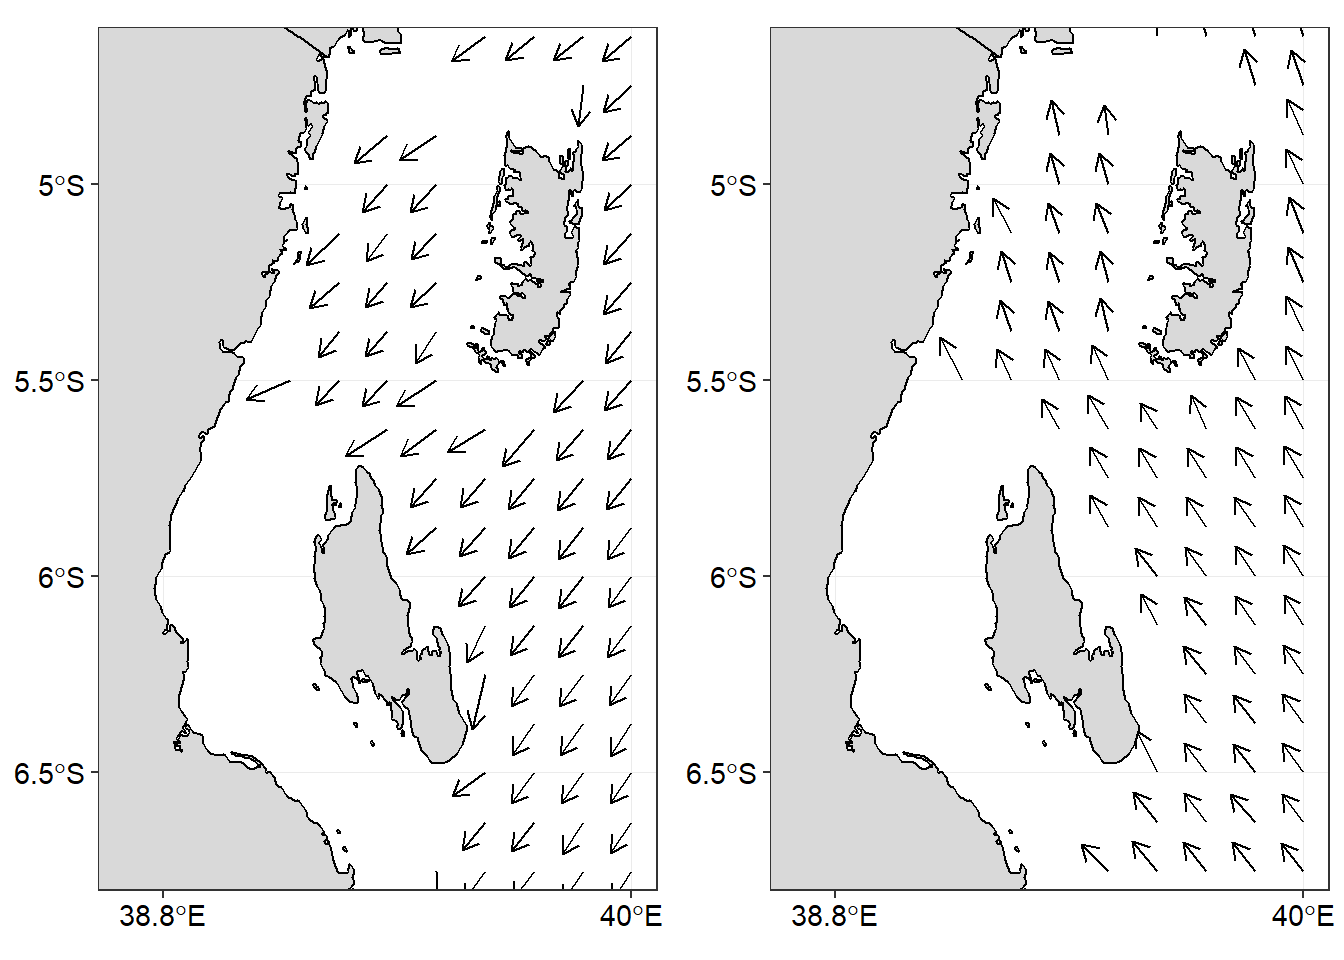 Climatological monthly Wind vector for a) February and b) August